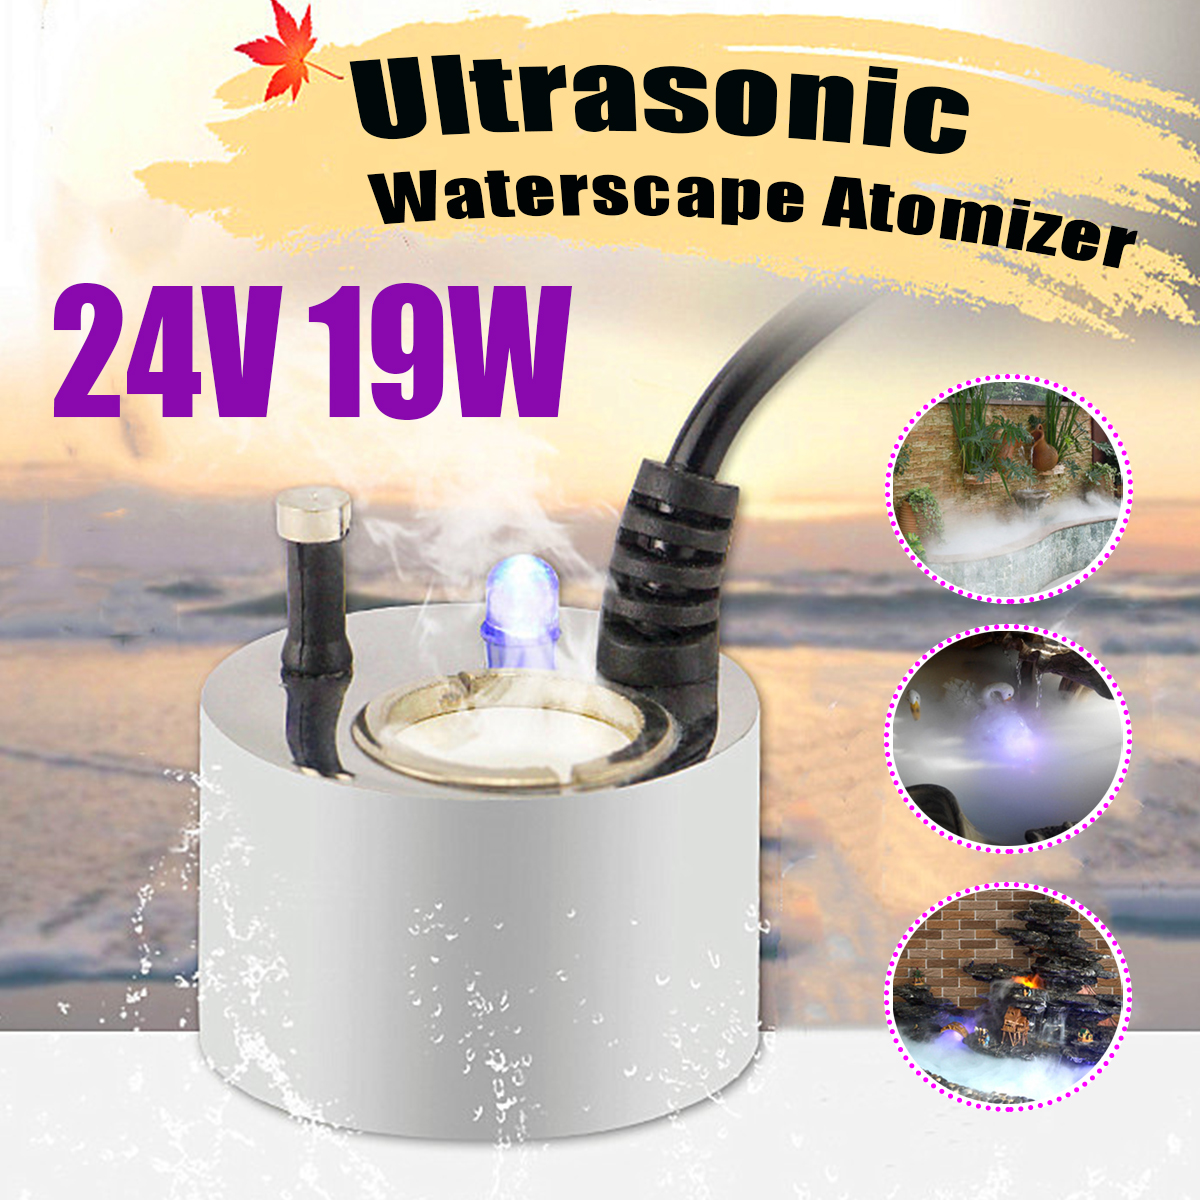 24V-19W-36mm-Ultrasonic-Air-Humidifier-Household-Mist-Maker-Waterscape-Atomizer-1725567-2